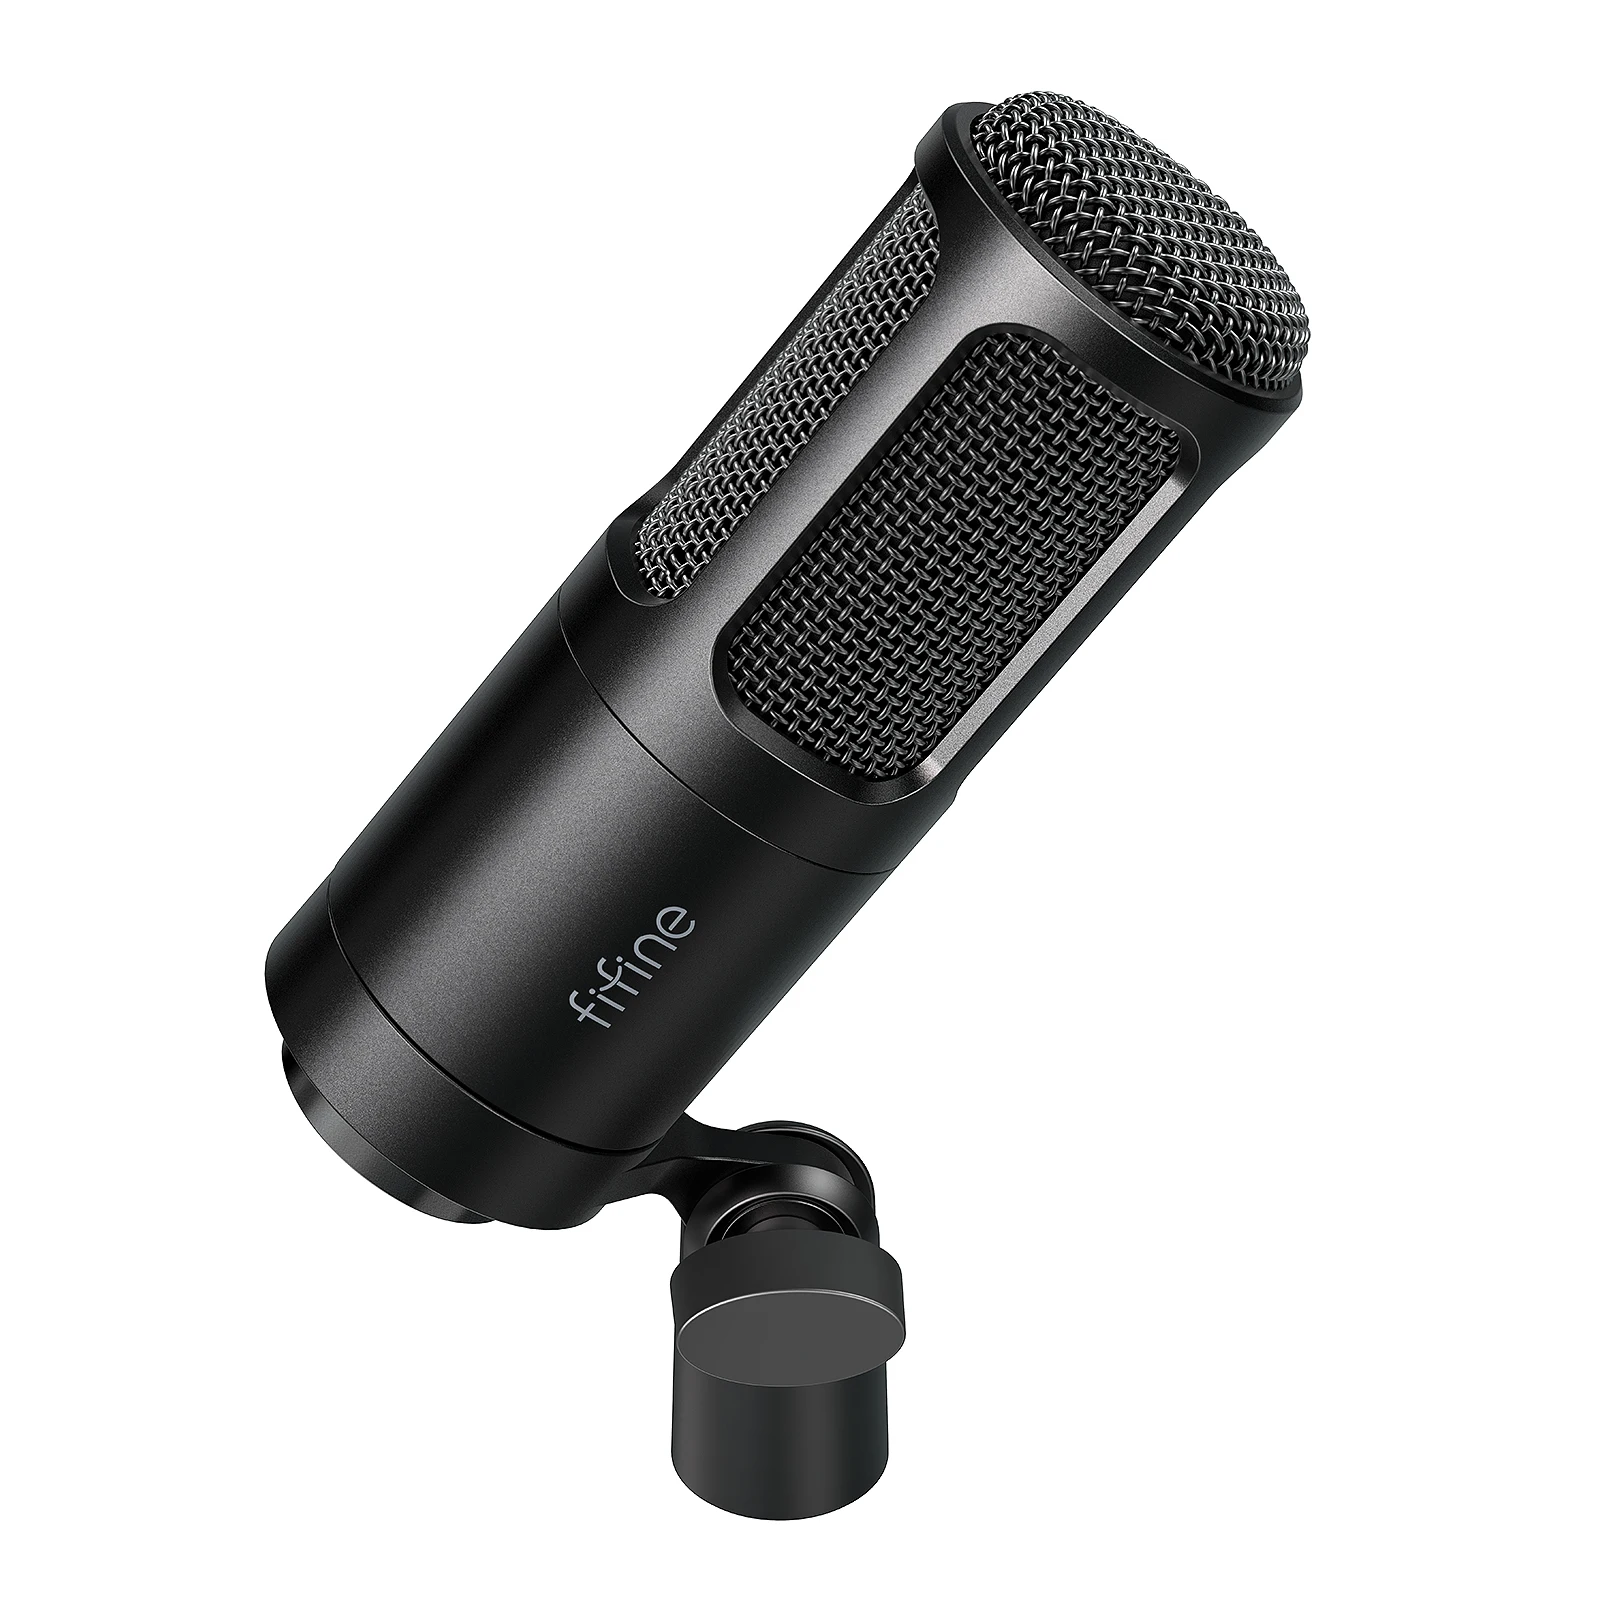 FIFINE XLR Dynamic Microphone,Vocal Podcast Mic with Cardioid Pattern, Metal Mic for Streaming/Dubbing/Video Recording,K669D